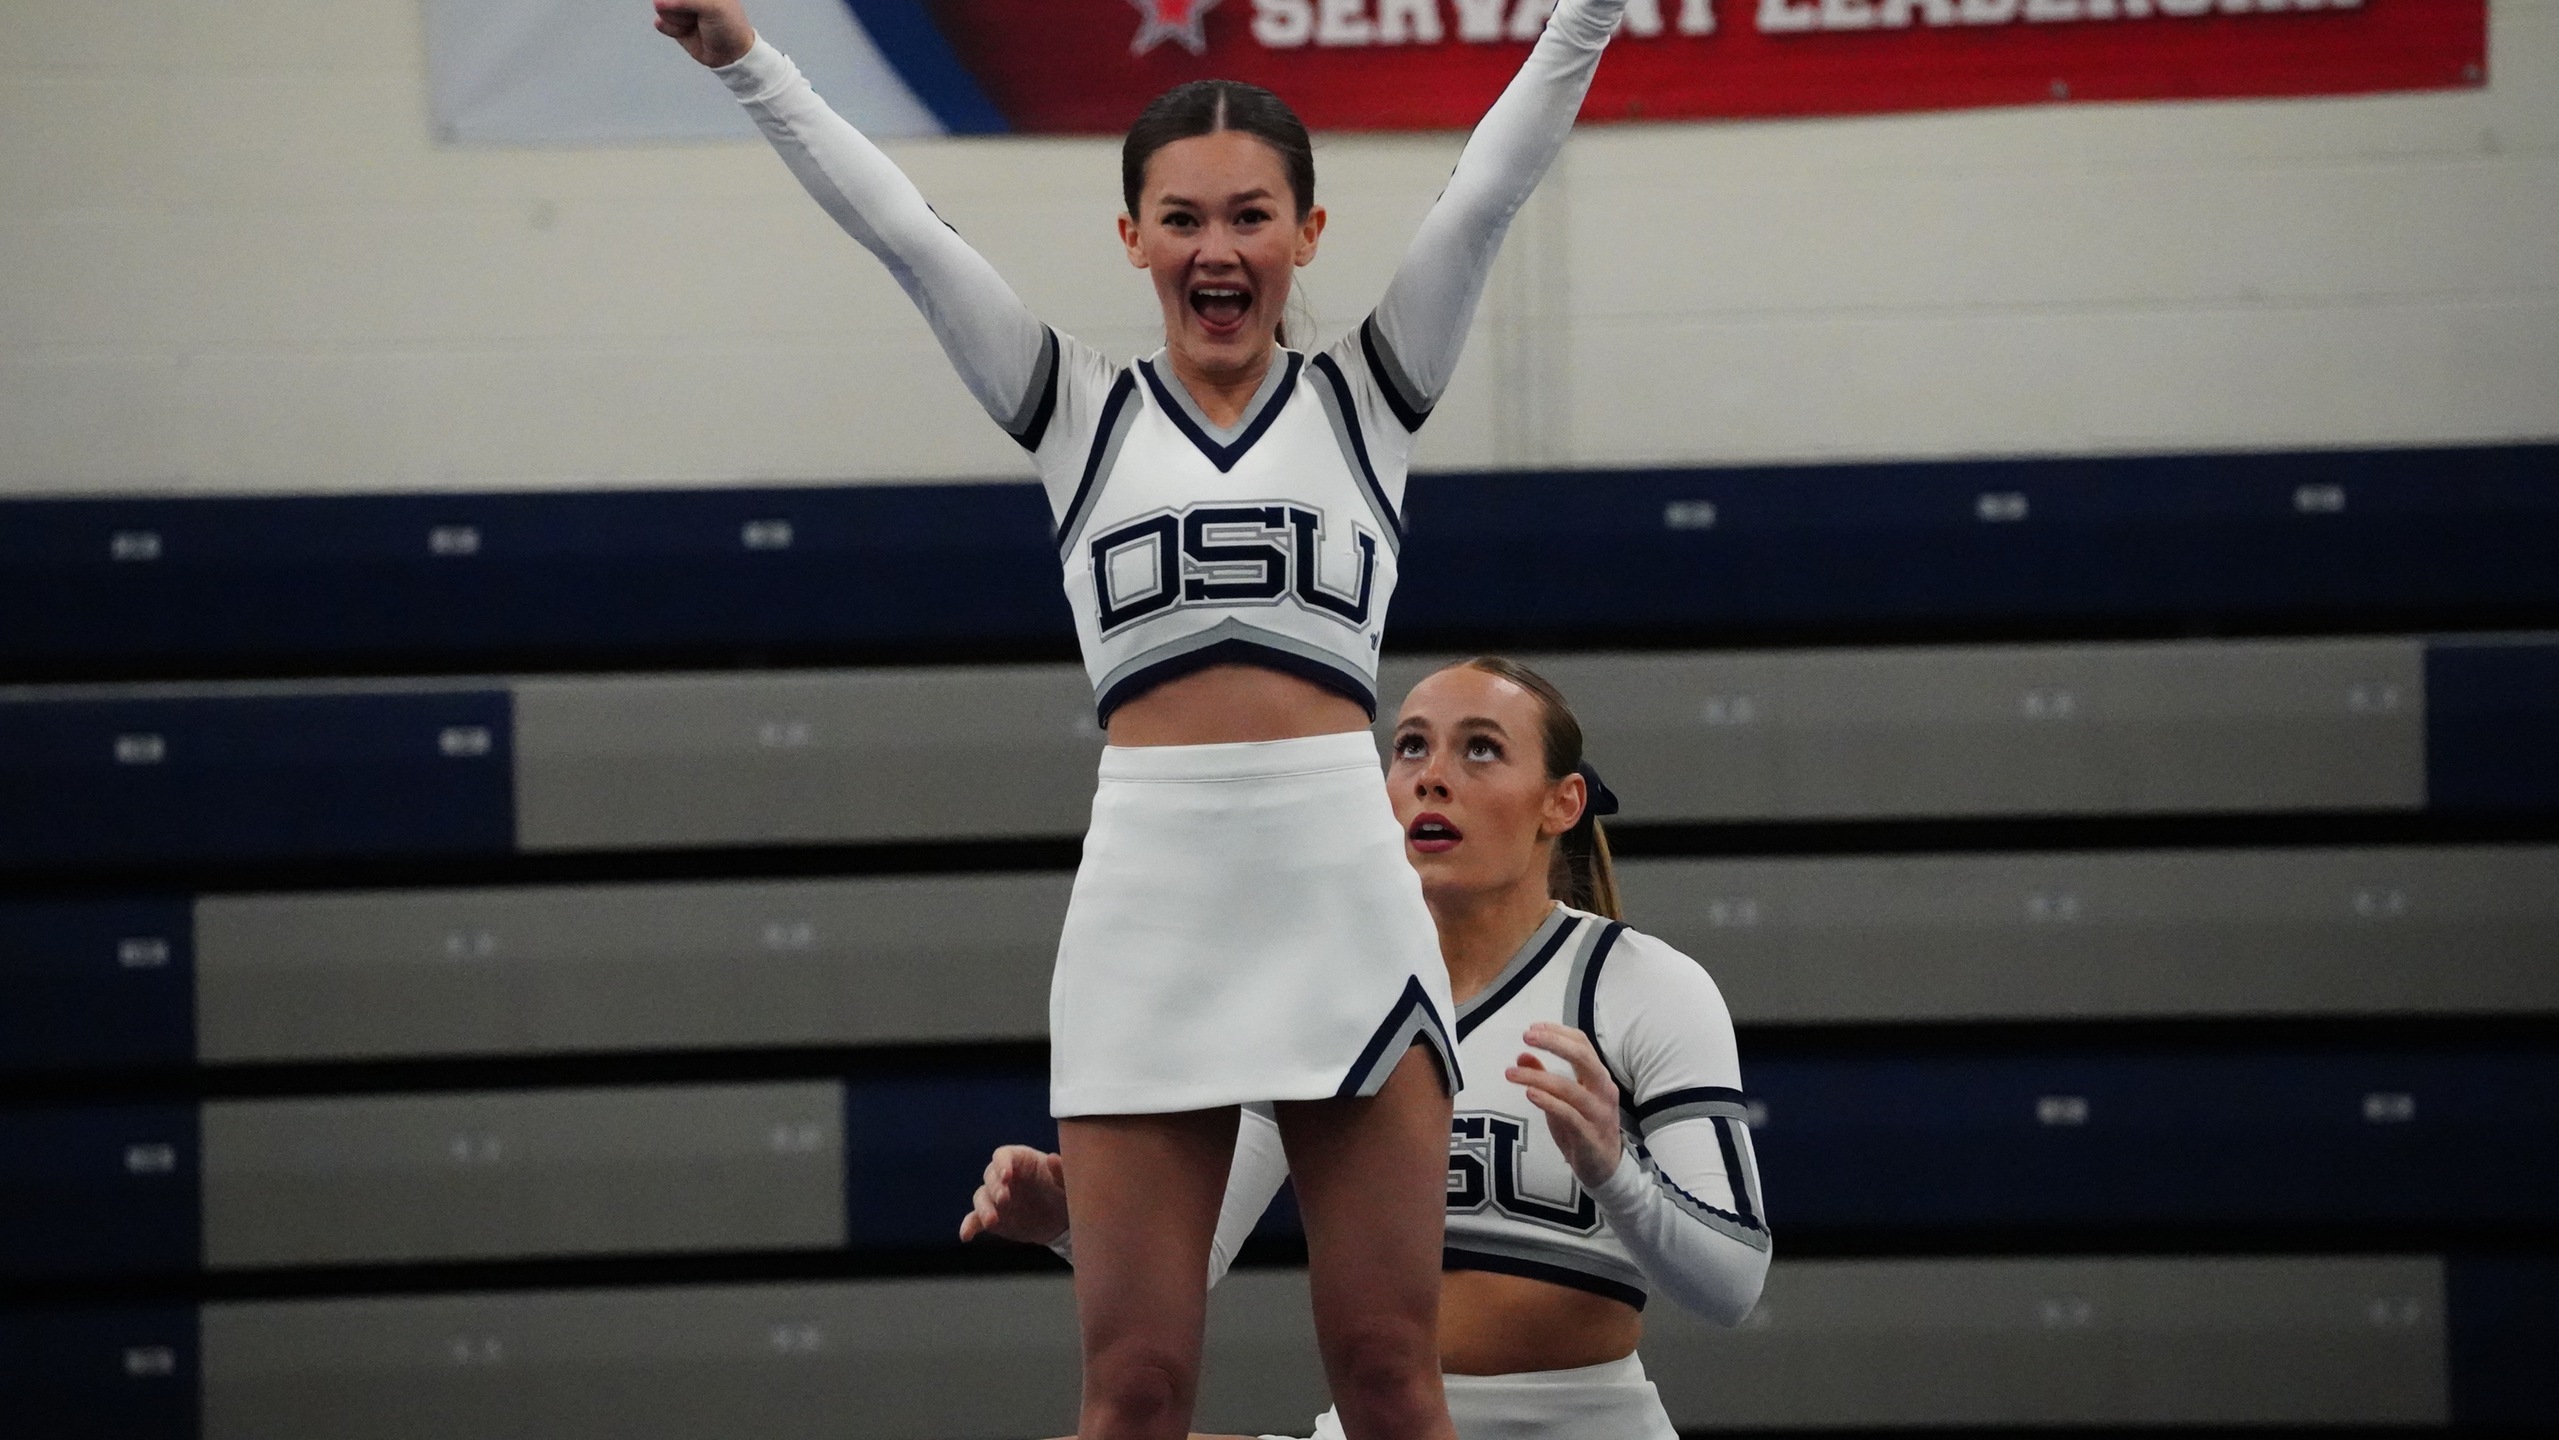 Blue Hawk cheer wins virtual competition, sit atop NAIA leaderboards